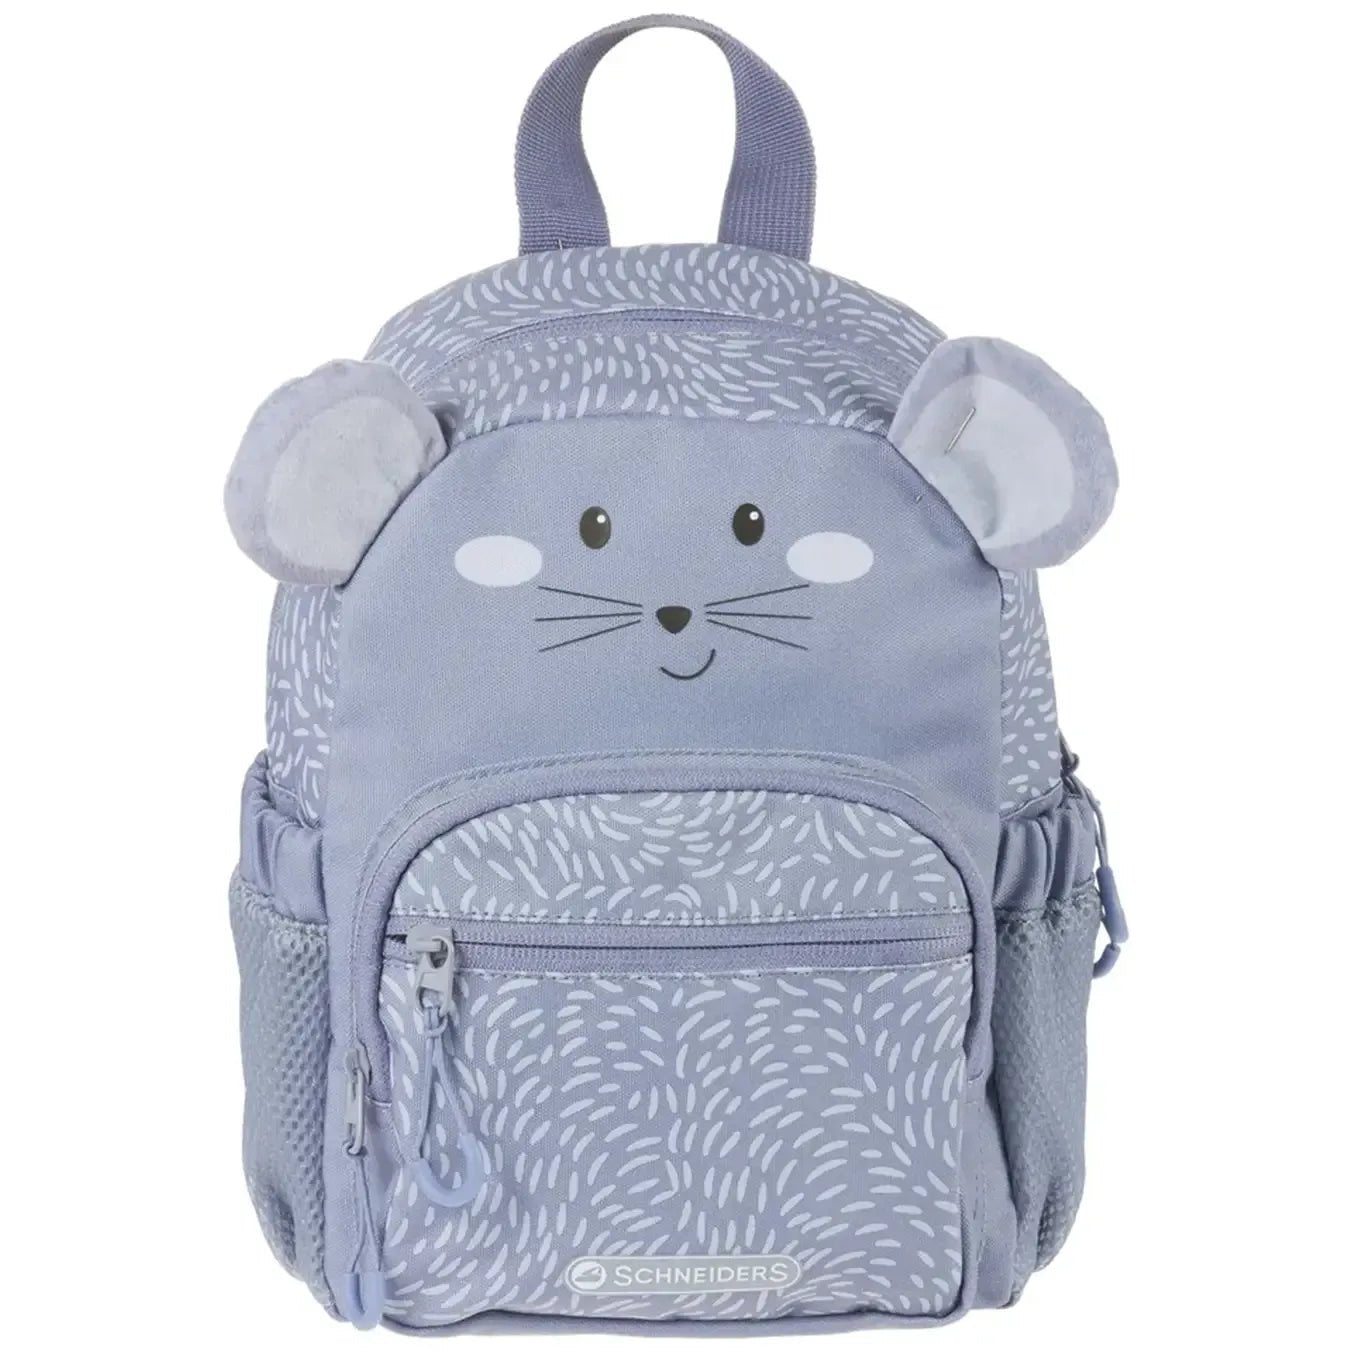 Schneiders Bags Mouse Kids Rucksack 27 cm - Lilac